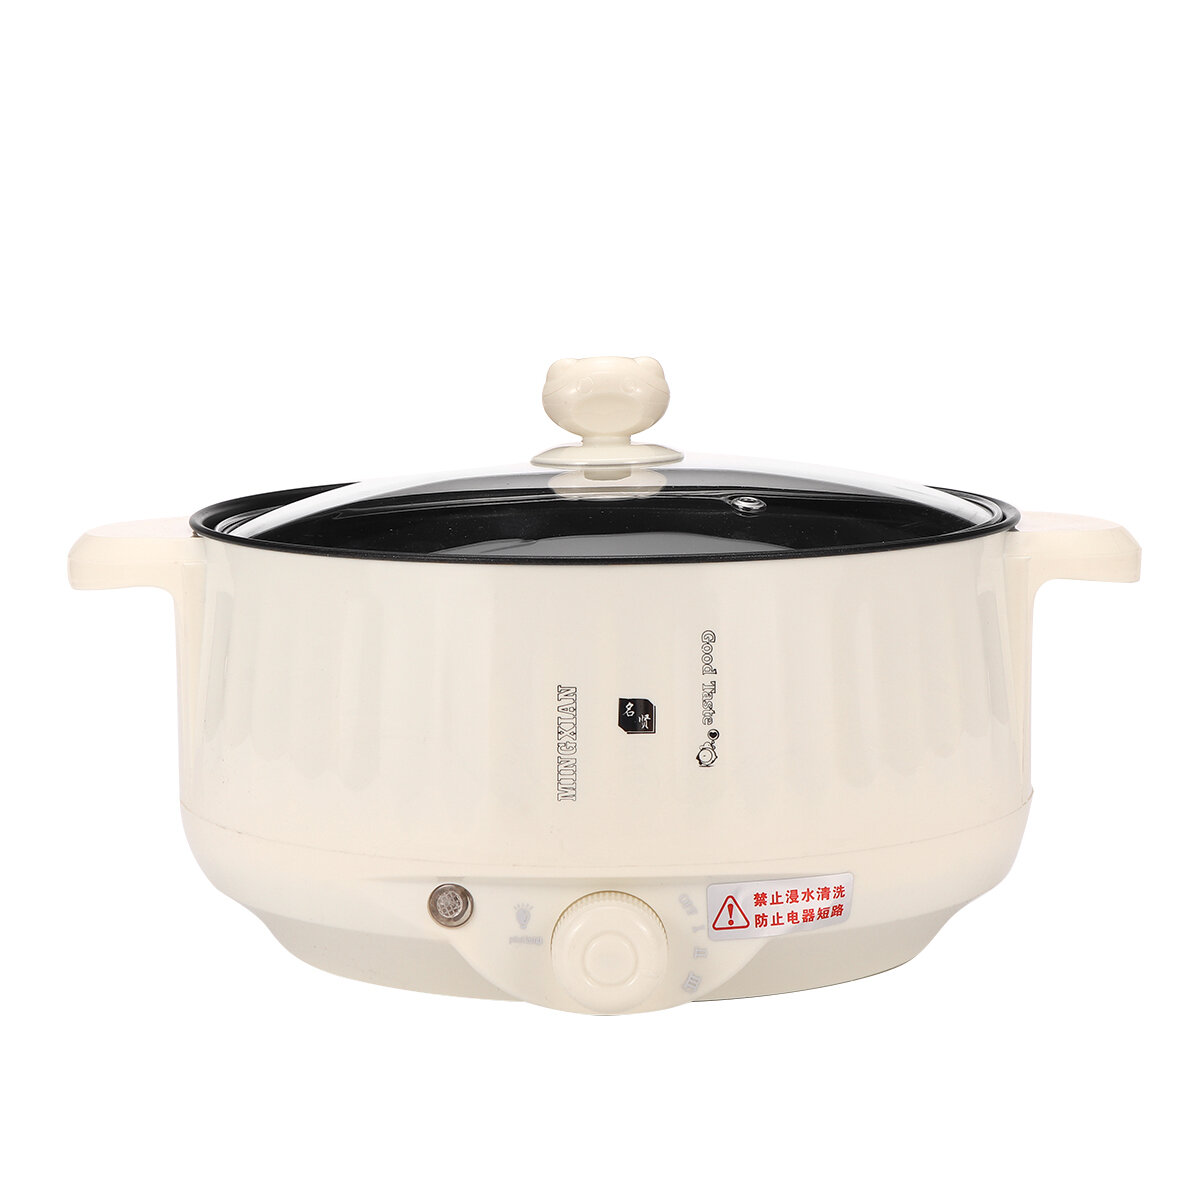 Zcm Electric Cooking Pot 220V Electric Rice Cooker 2L Multi Cooker Mini Portable Electric Hot Pot Household Cooking Pot For Office School Color : 2 layer